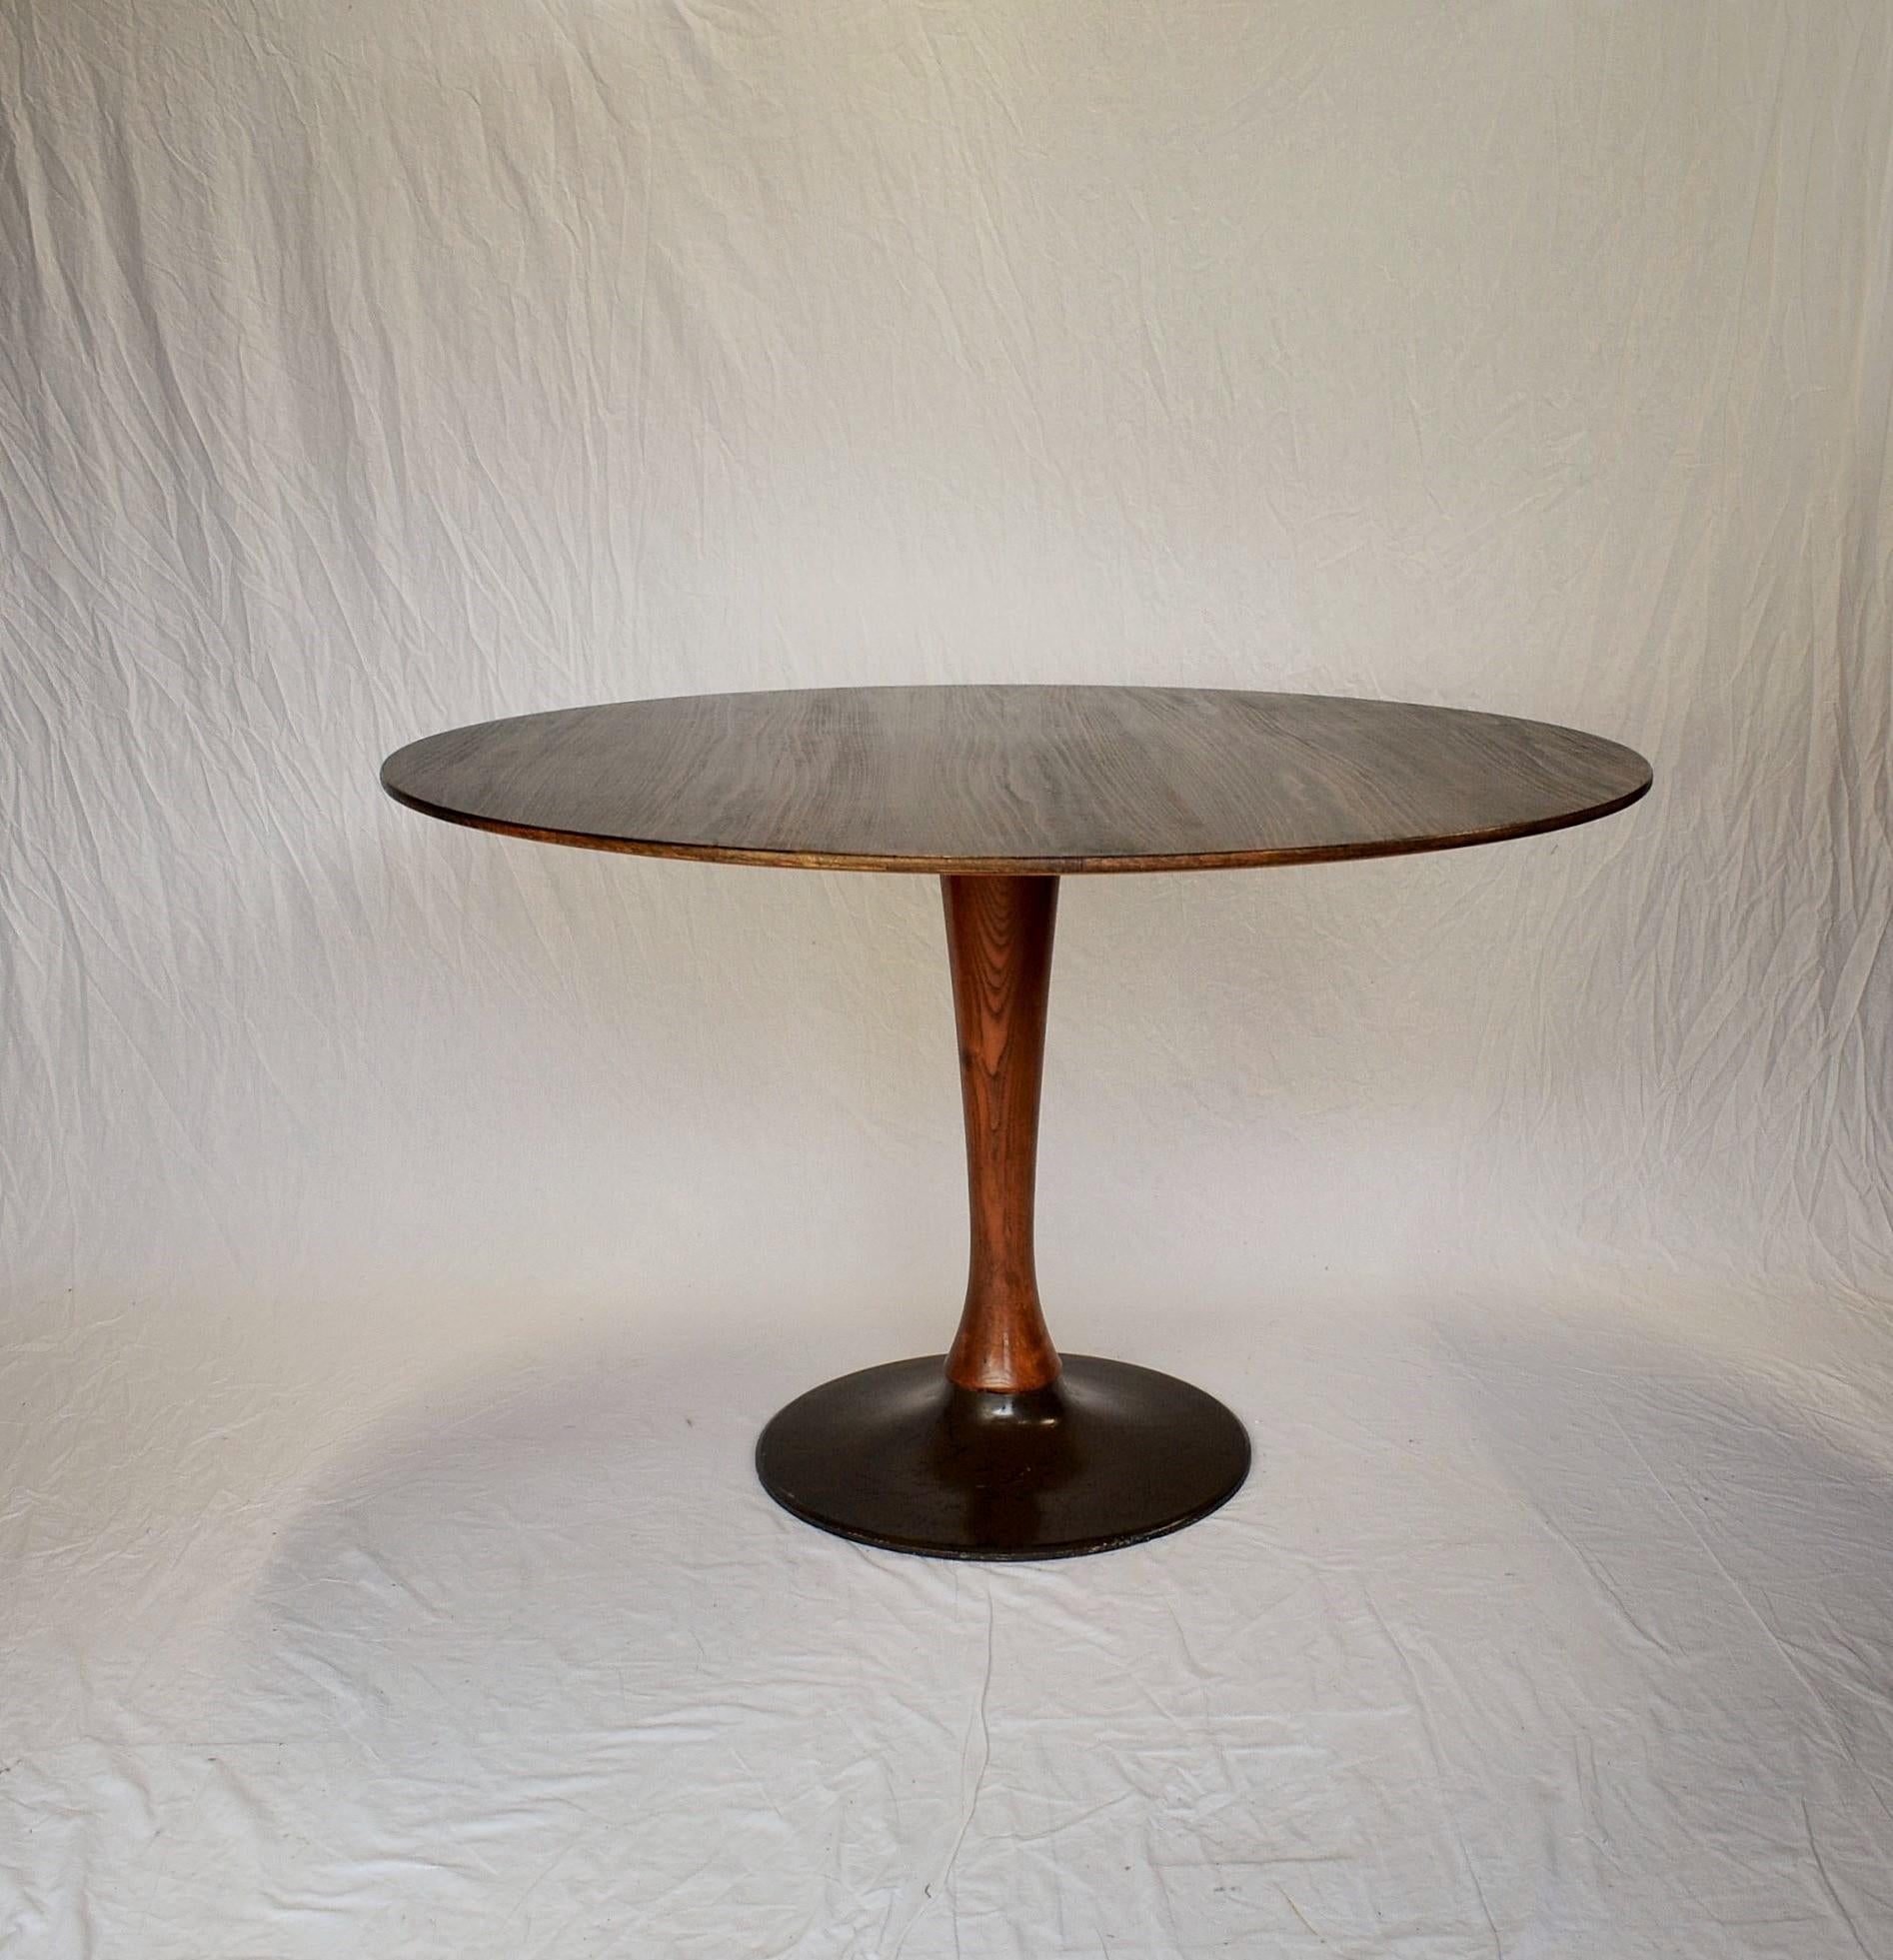 - Made in Czechoslovakia
- Made of beech, veneer
- The table is Stabil
- Good condition.
- Cleaned.